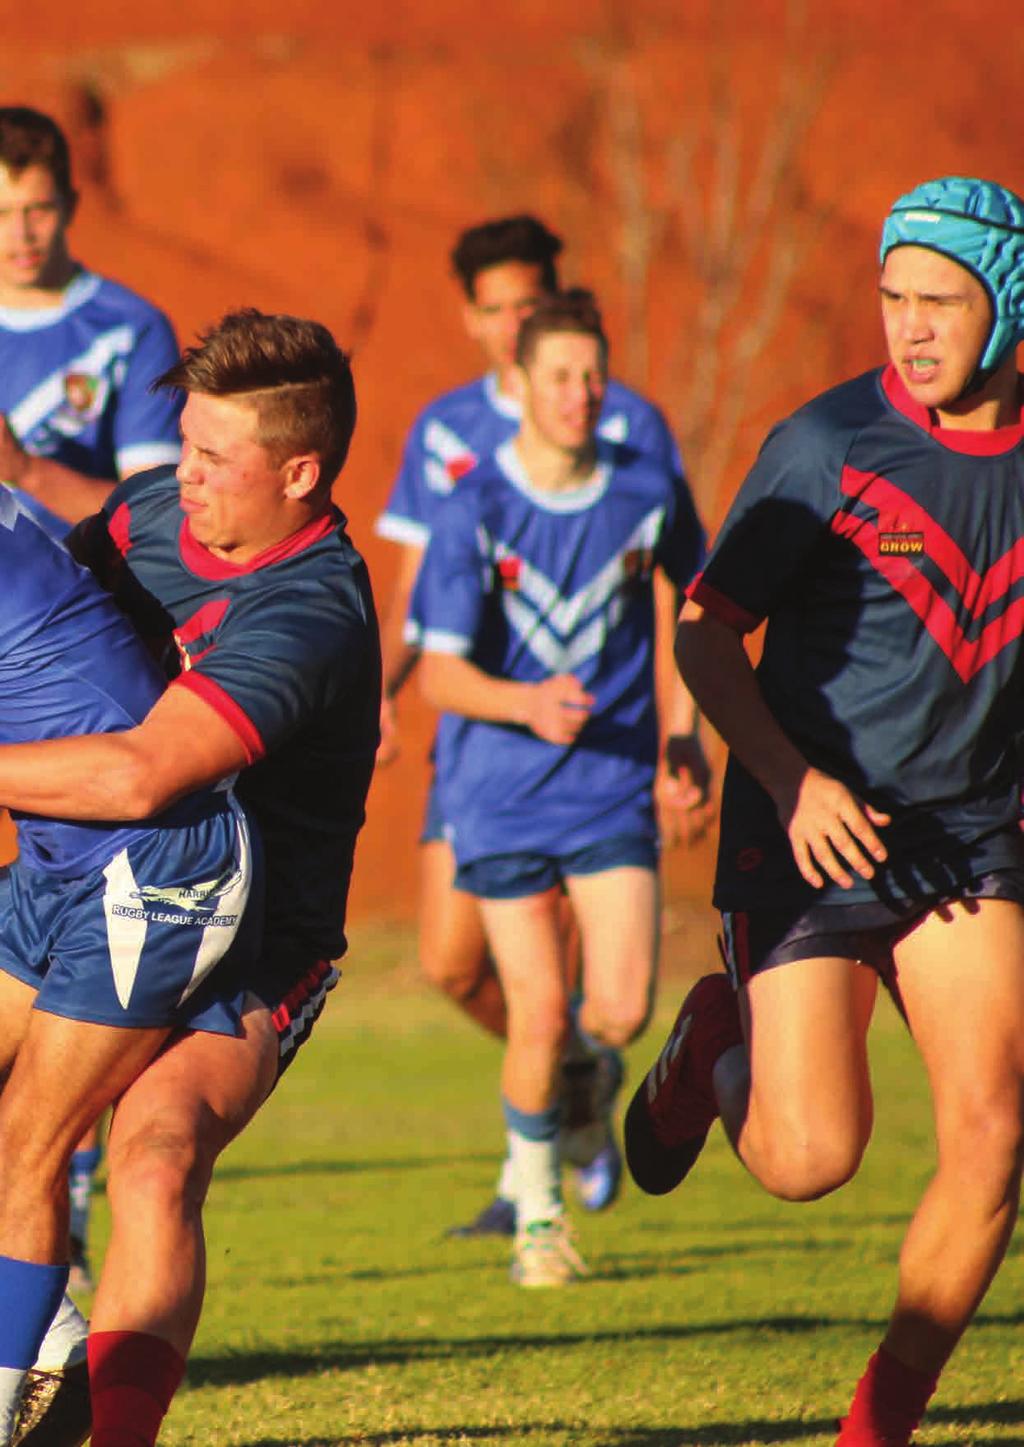 Warwick and Harristown Academies compete for the ball during a rugby